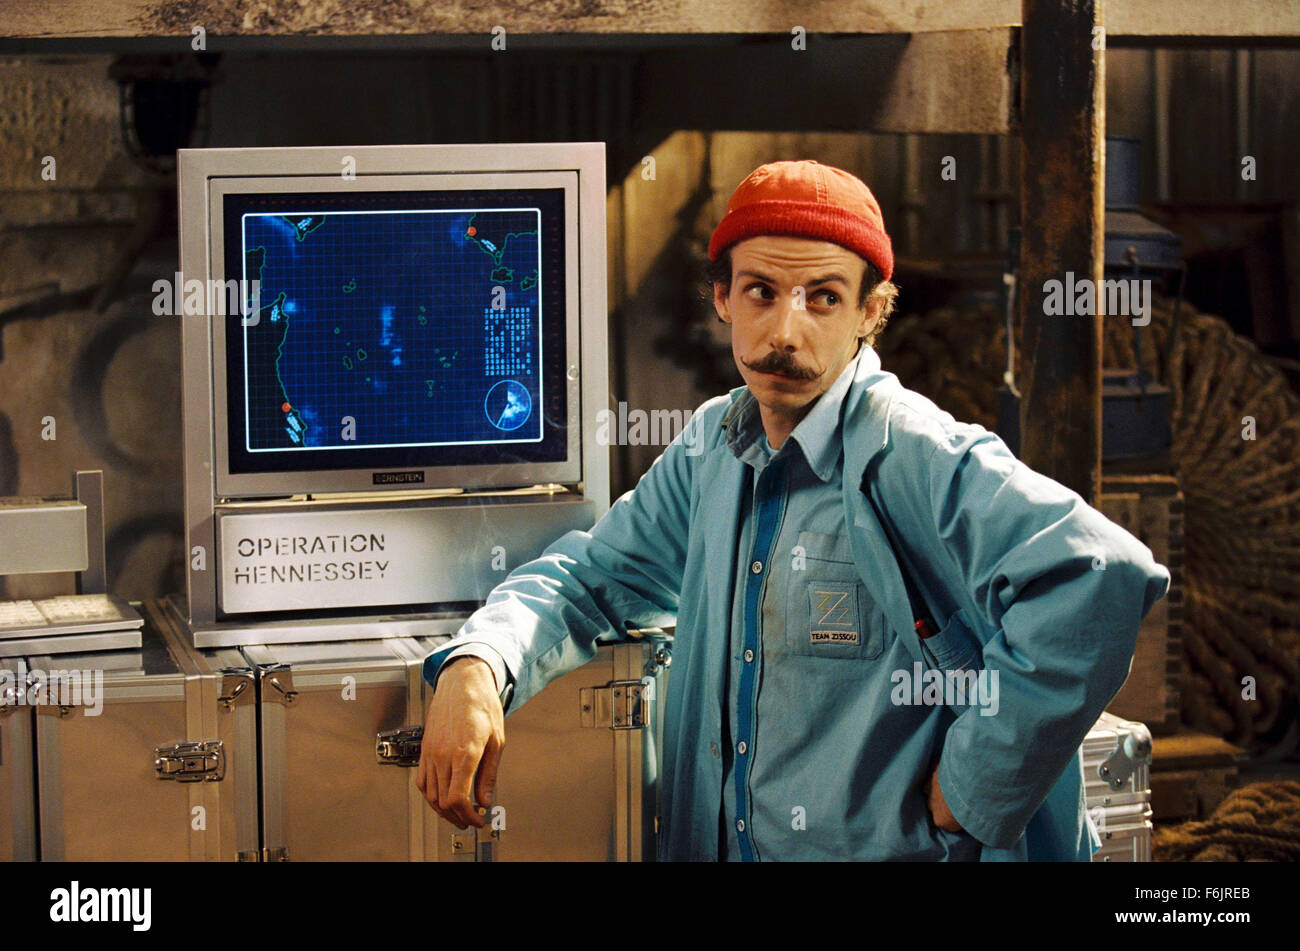 Nov 20, 2004; Rome, Lazio, ITALY; NOAH TAYLOR stars as Vladimir Wolodarsky in the adventure comedy/drama 'The Life Aquatic with Steve Zissou' directed by Wes Anderson. Stock Photo